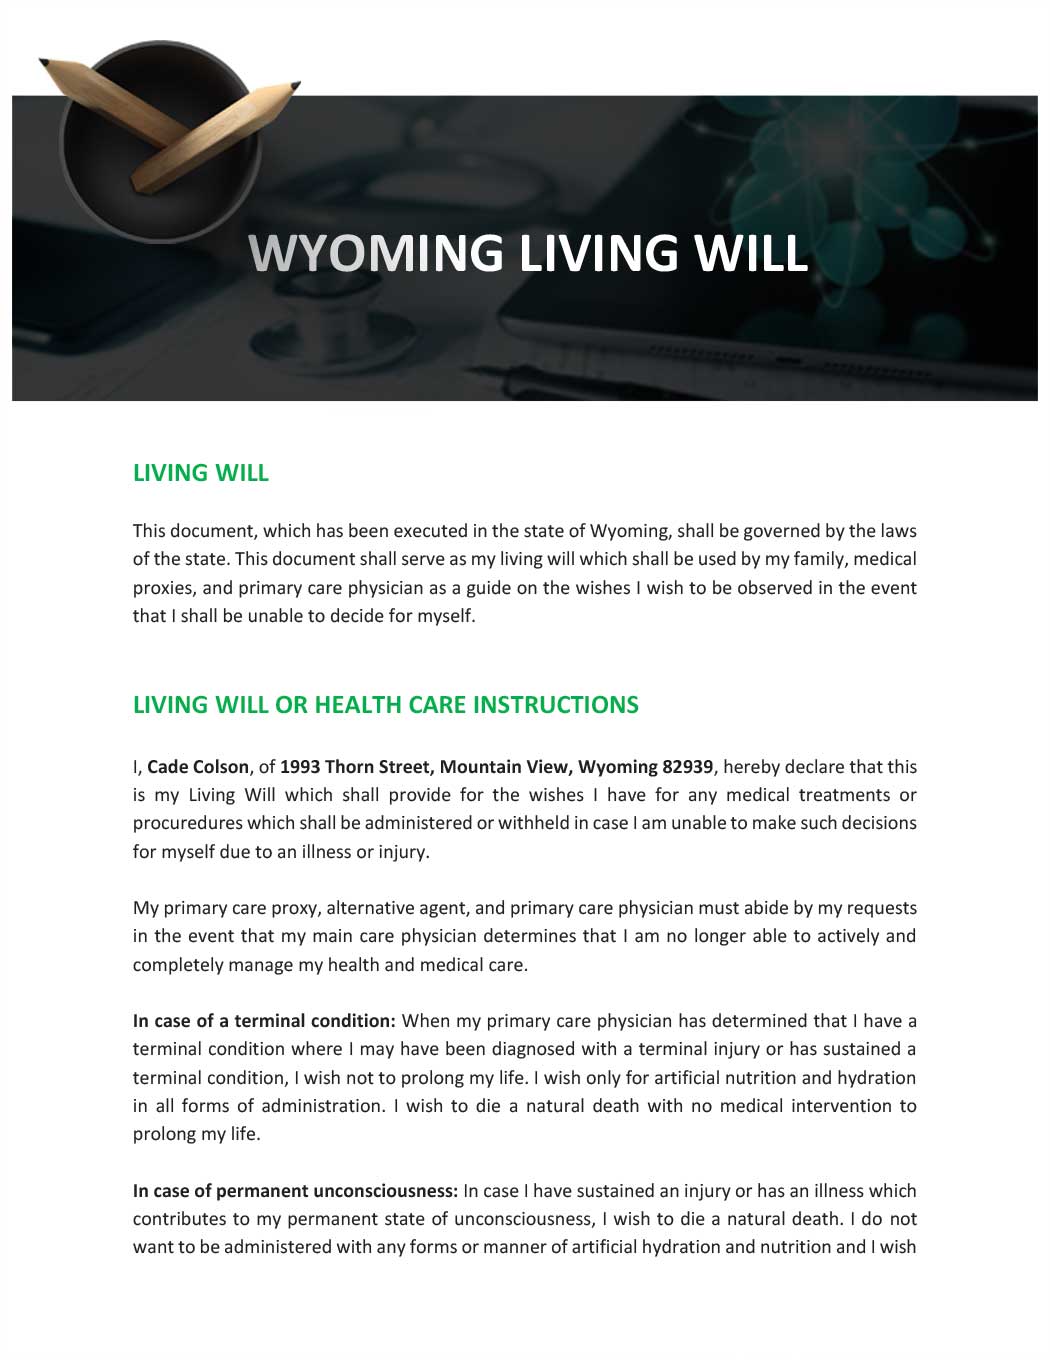 Wyoming Living Will Template